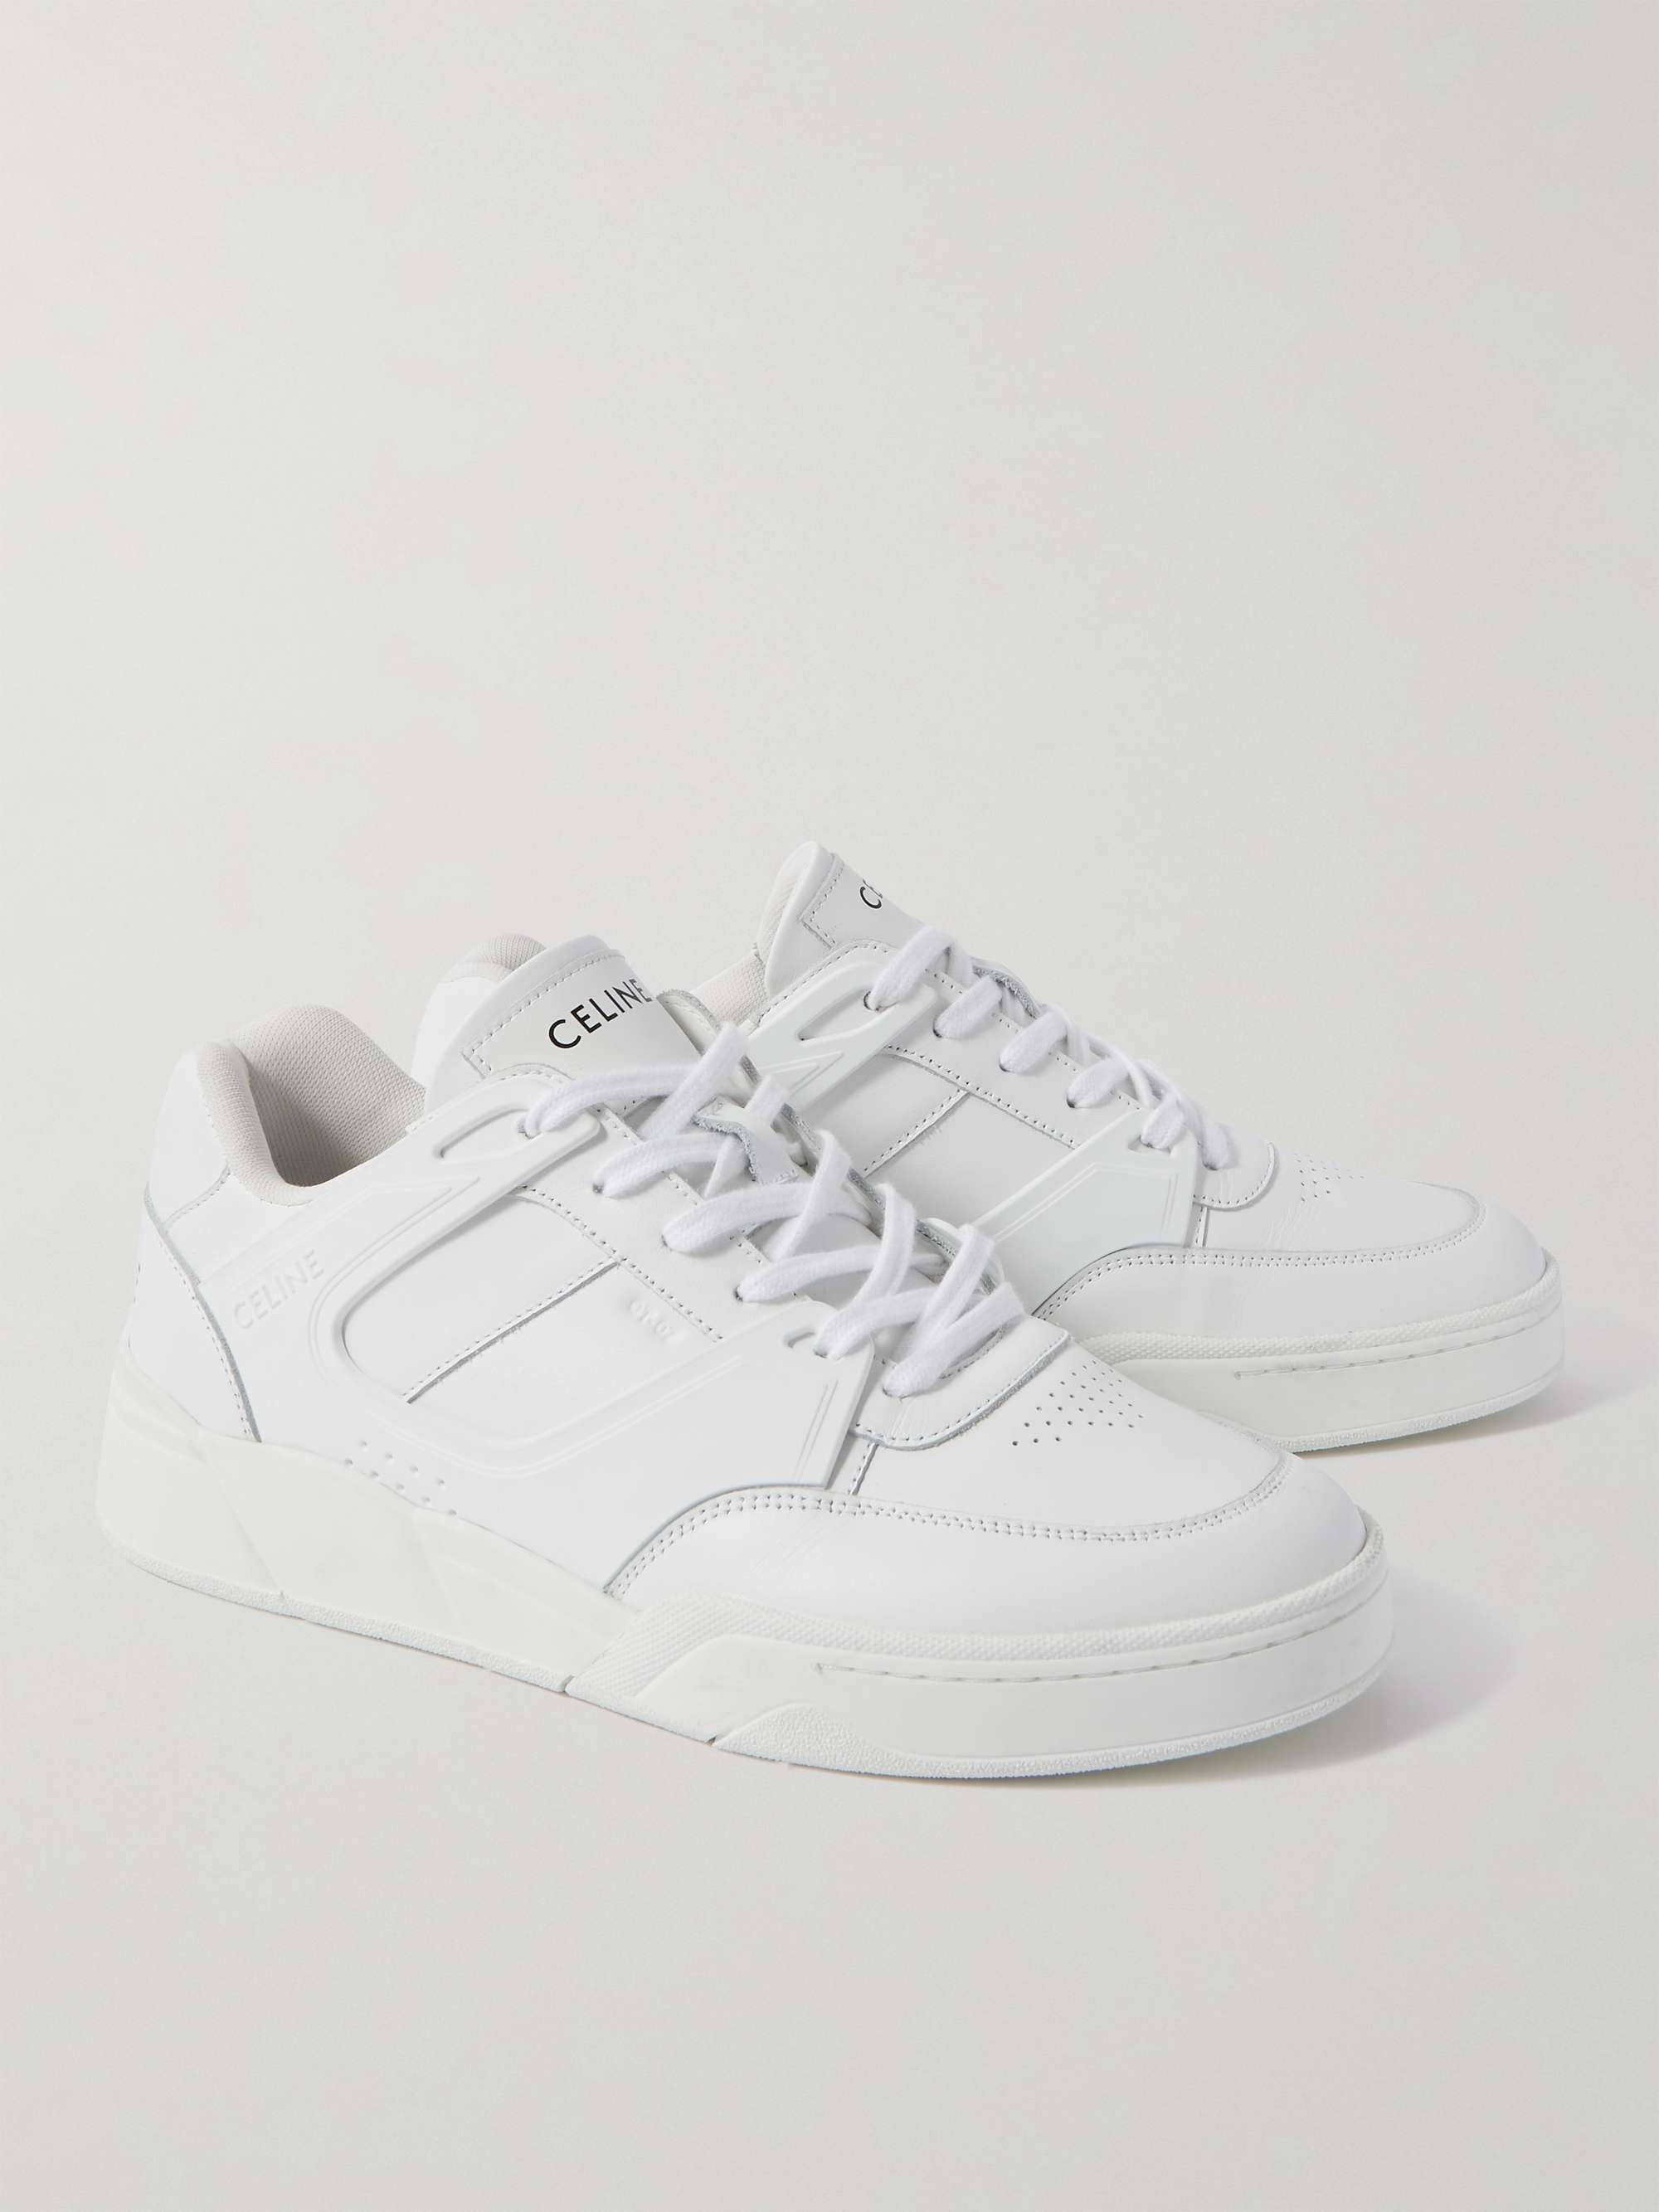 CELINE HOMME CT-07 Rubber-Trimmed Leather Sneakers